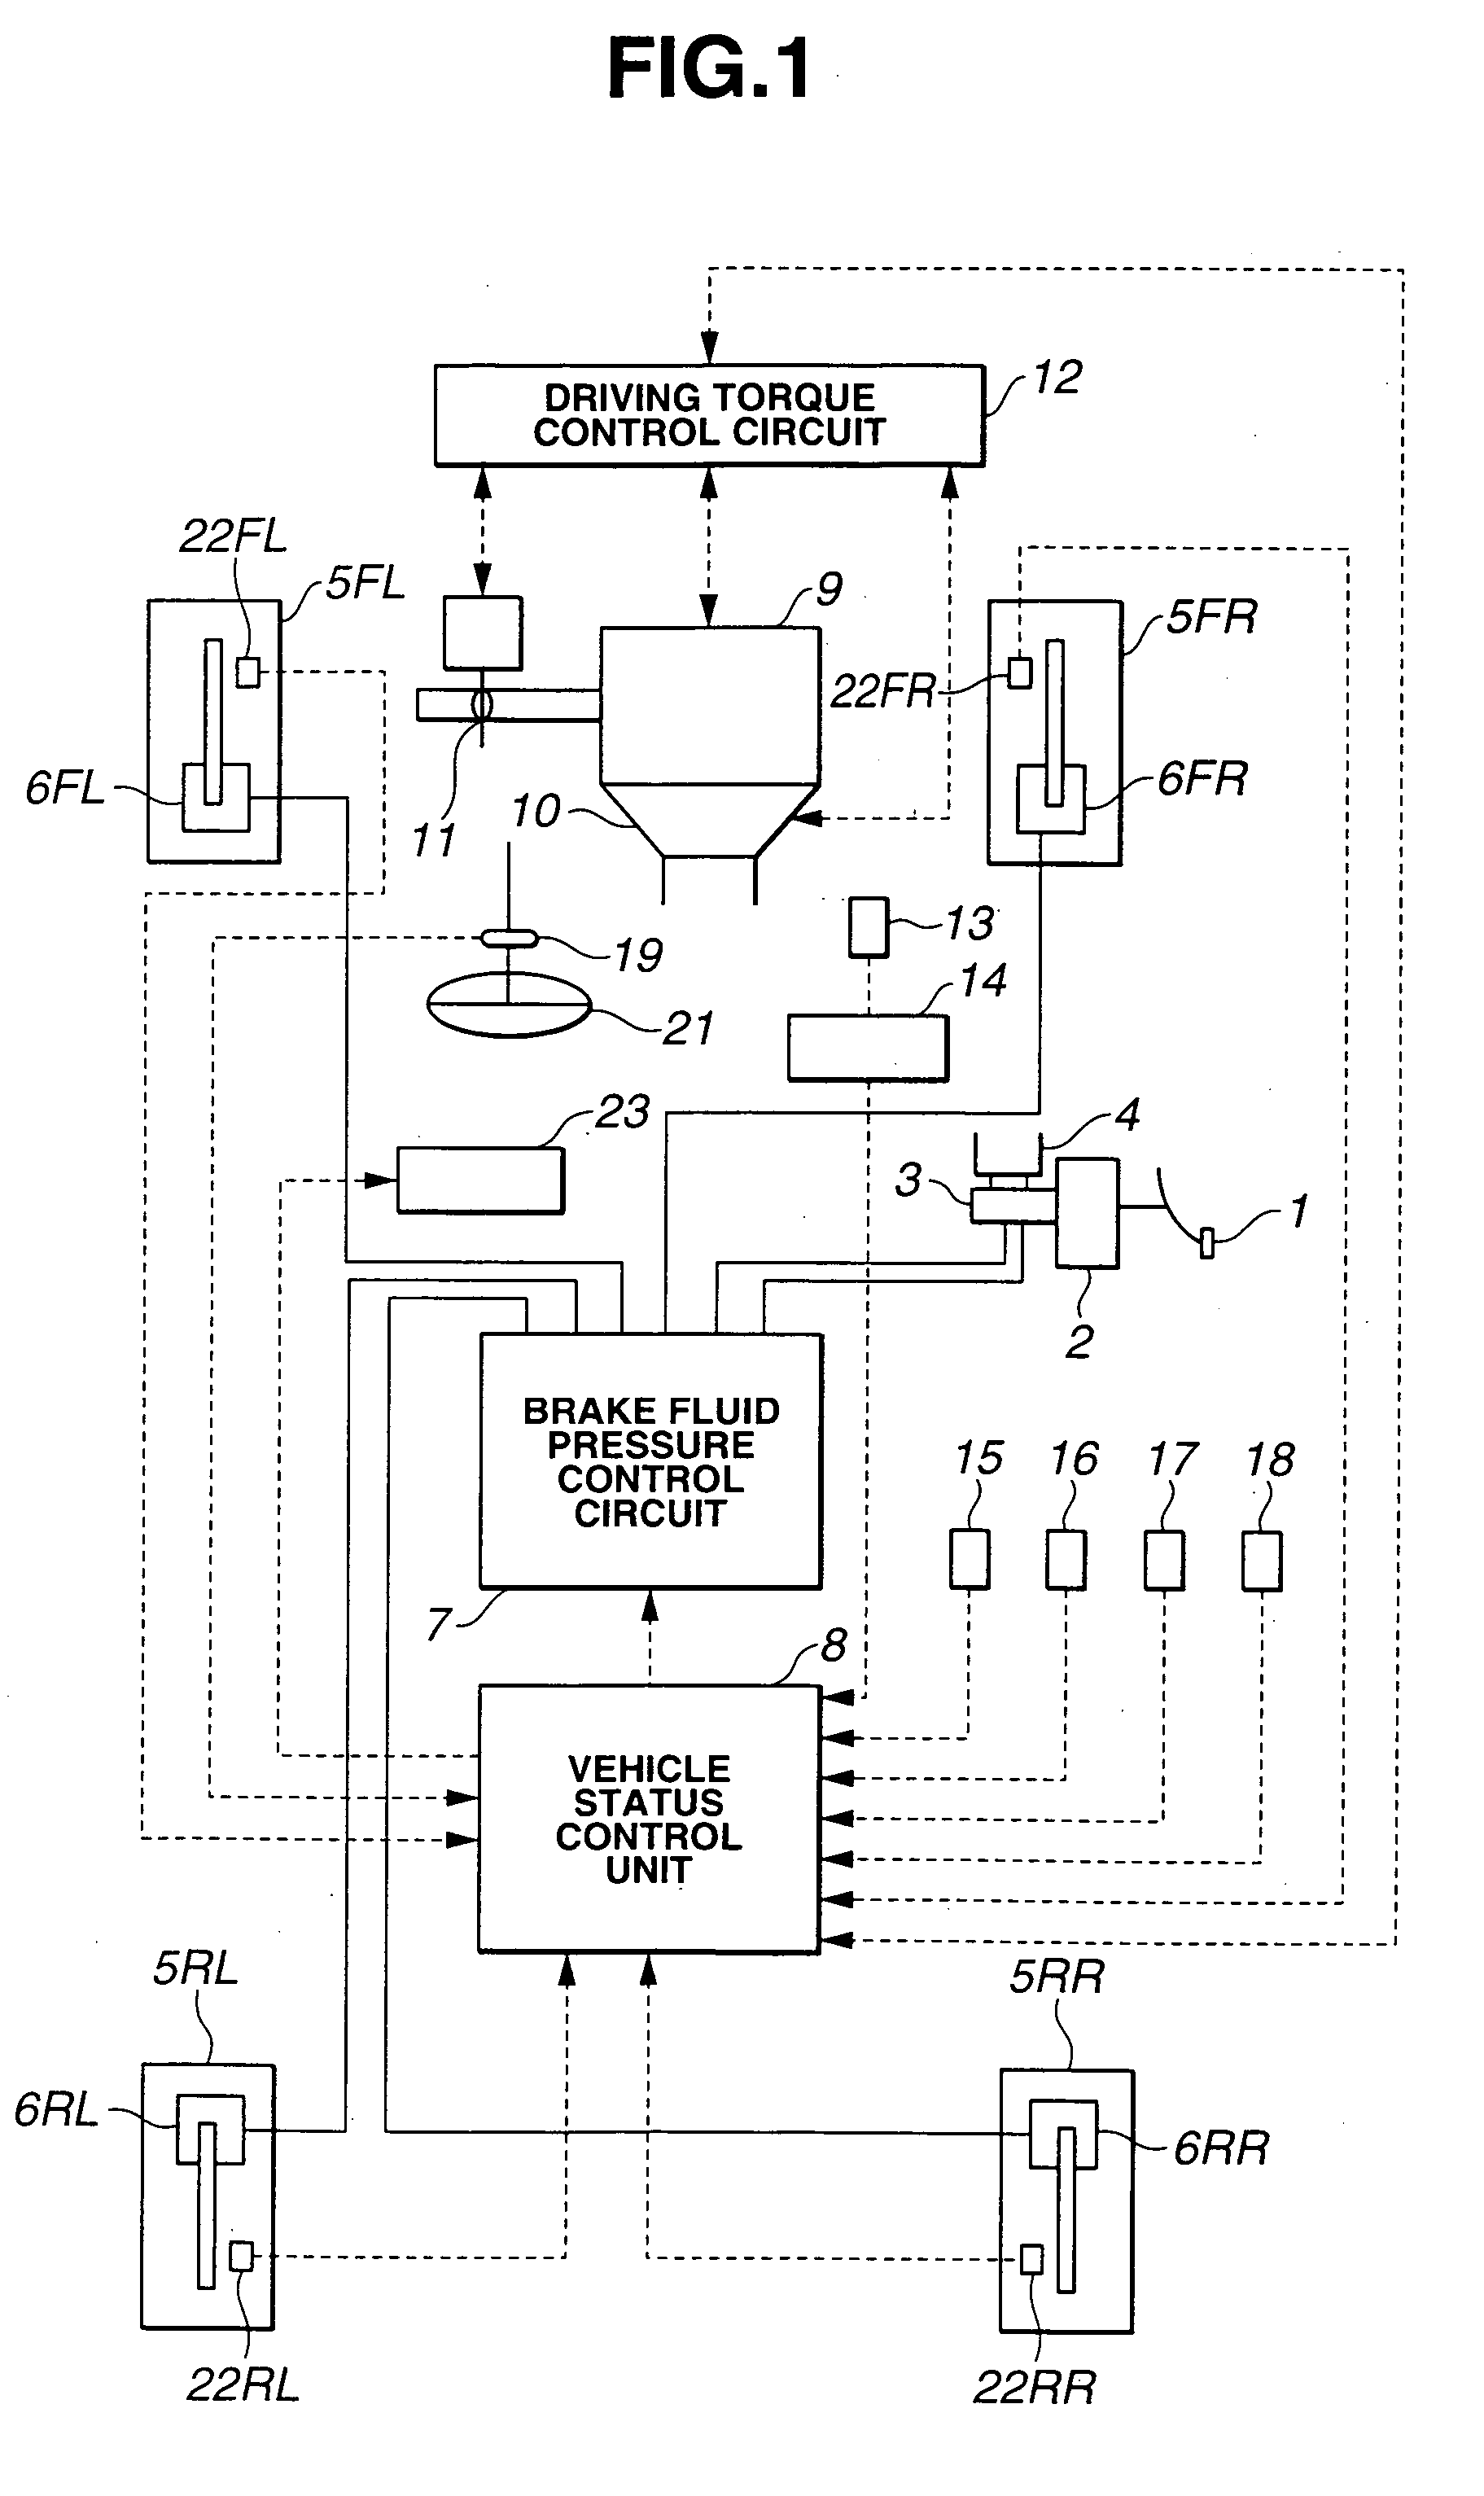 Declaration control apparatus and method for automotive vehicle